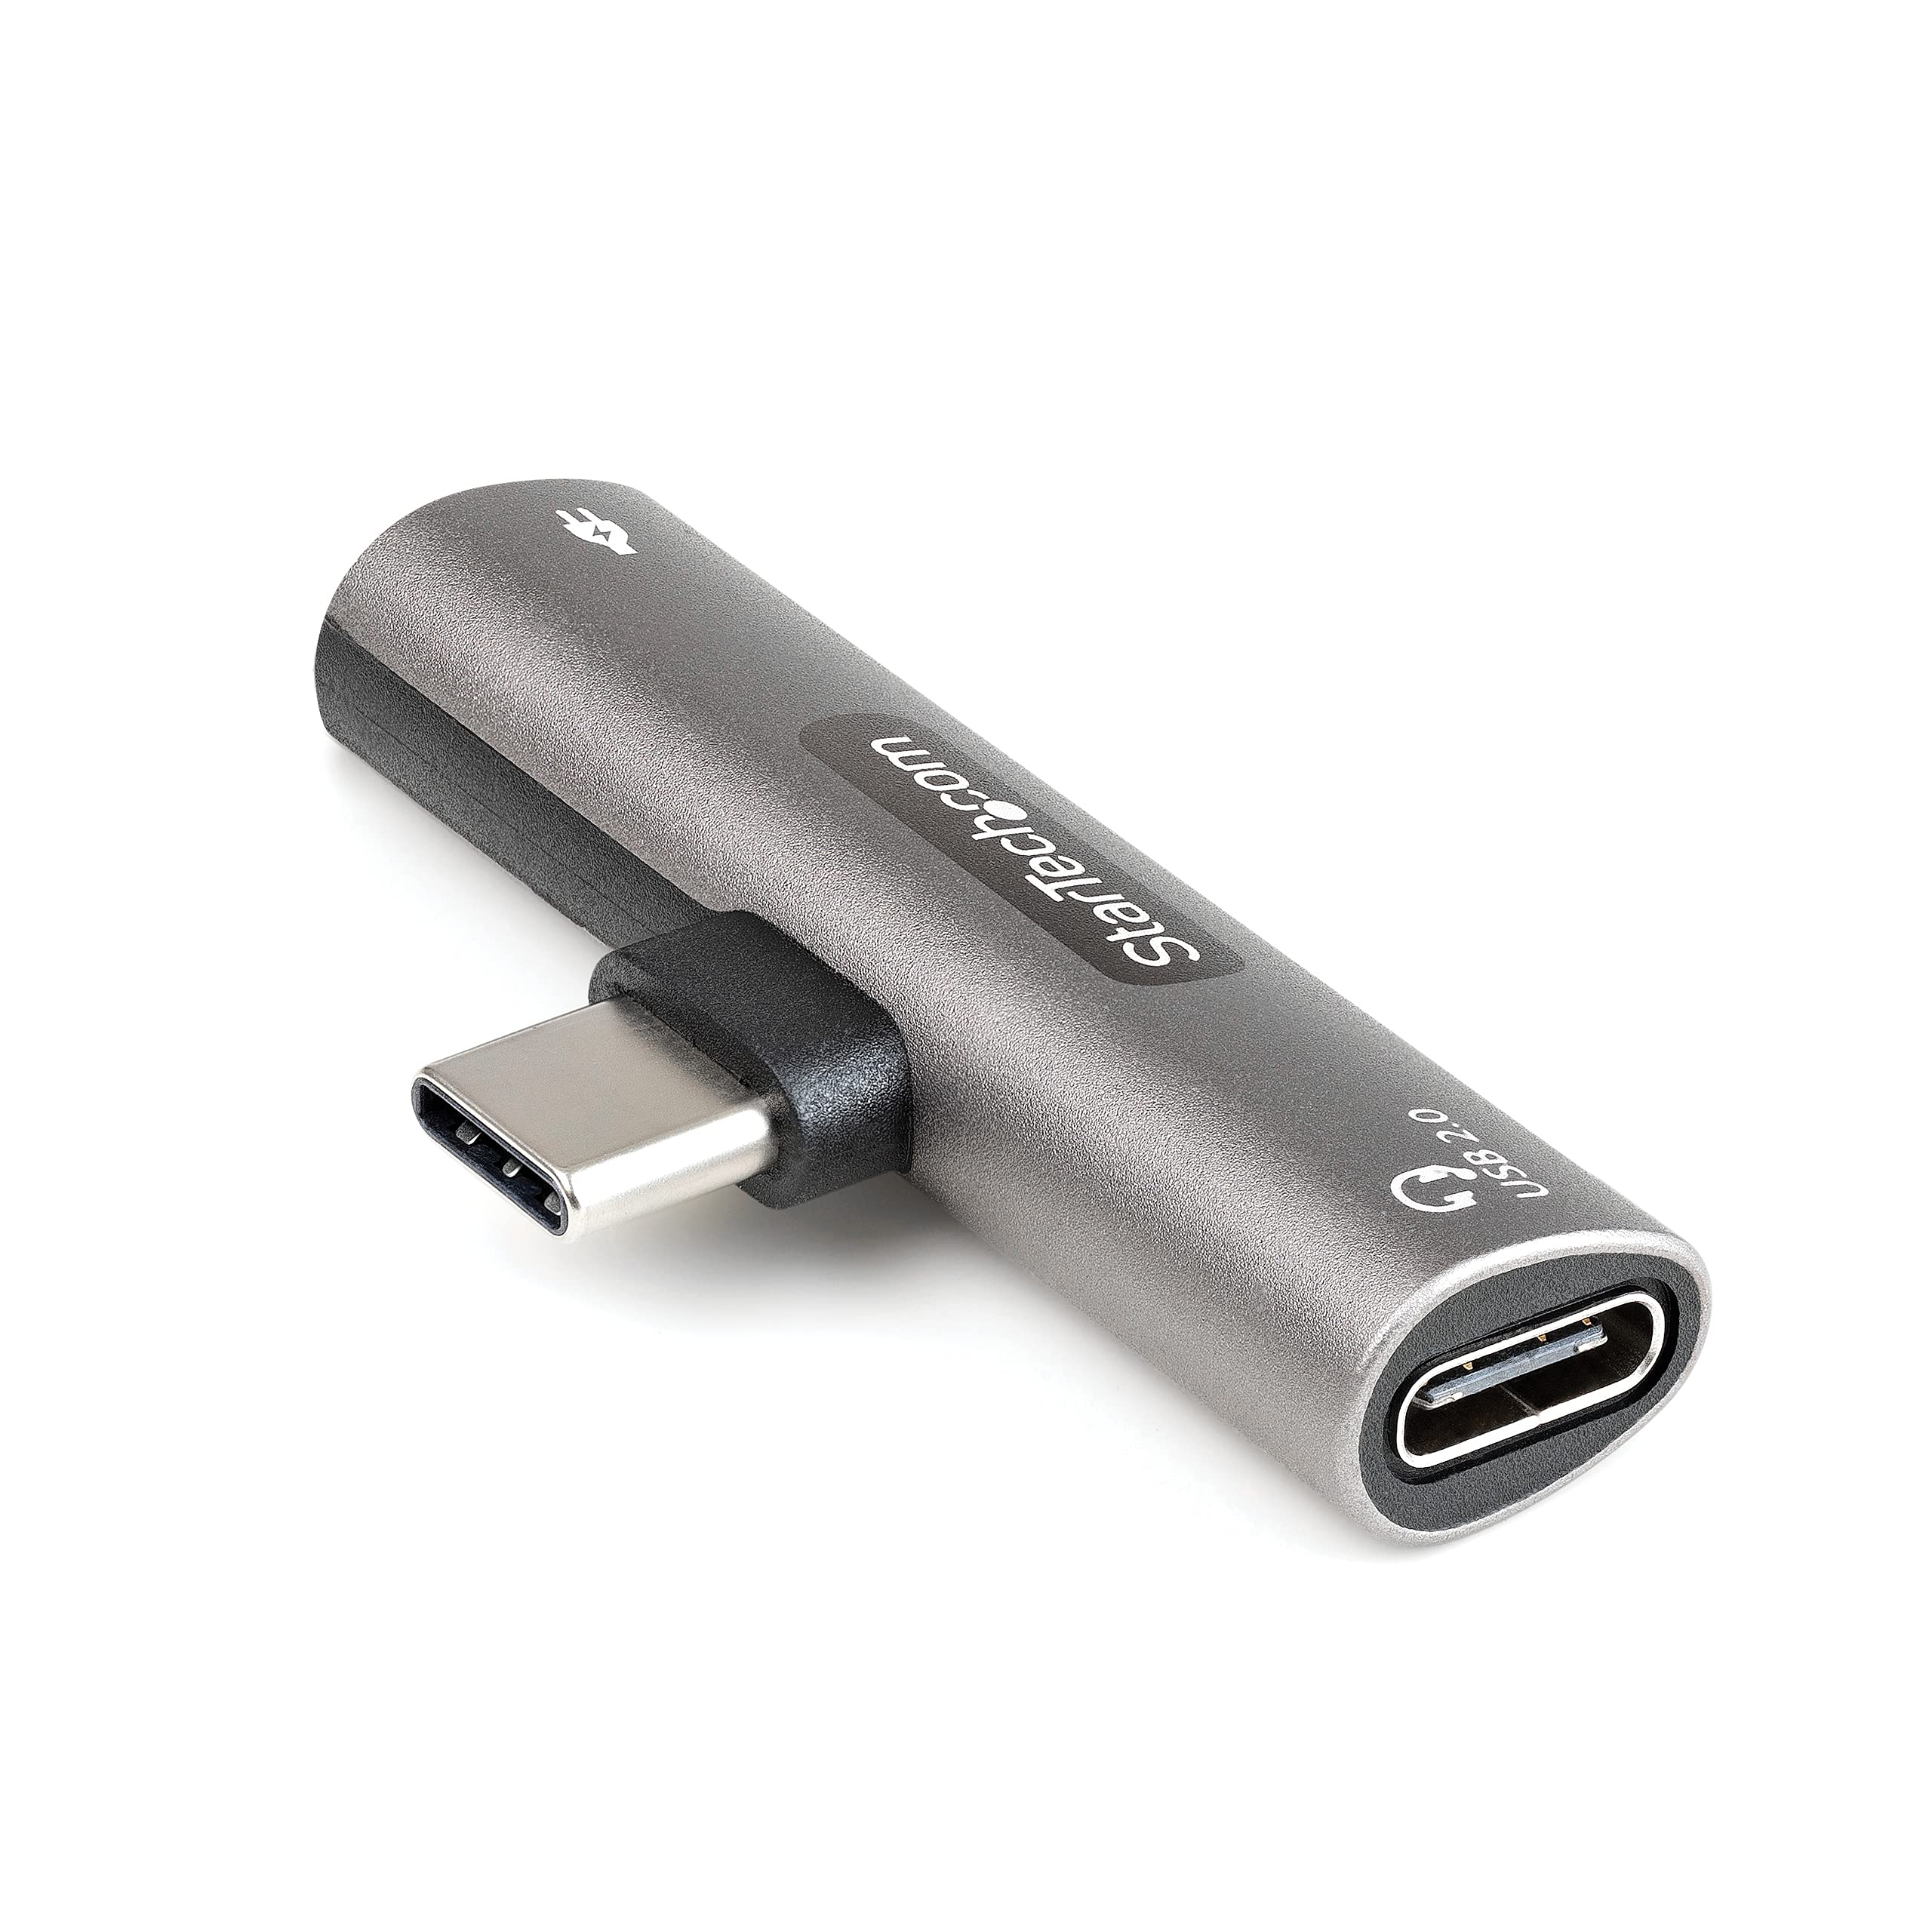 StarTech.com USB C Audio & Charge Adapter - USB-C Audio Adapter w/USB-C Audio Headphone/Headset Port and 60W USB Type-C Power Delivery Pass-Through Charger - for USB-C Phone/Tablet/Laptop (CDP2CAPDM)